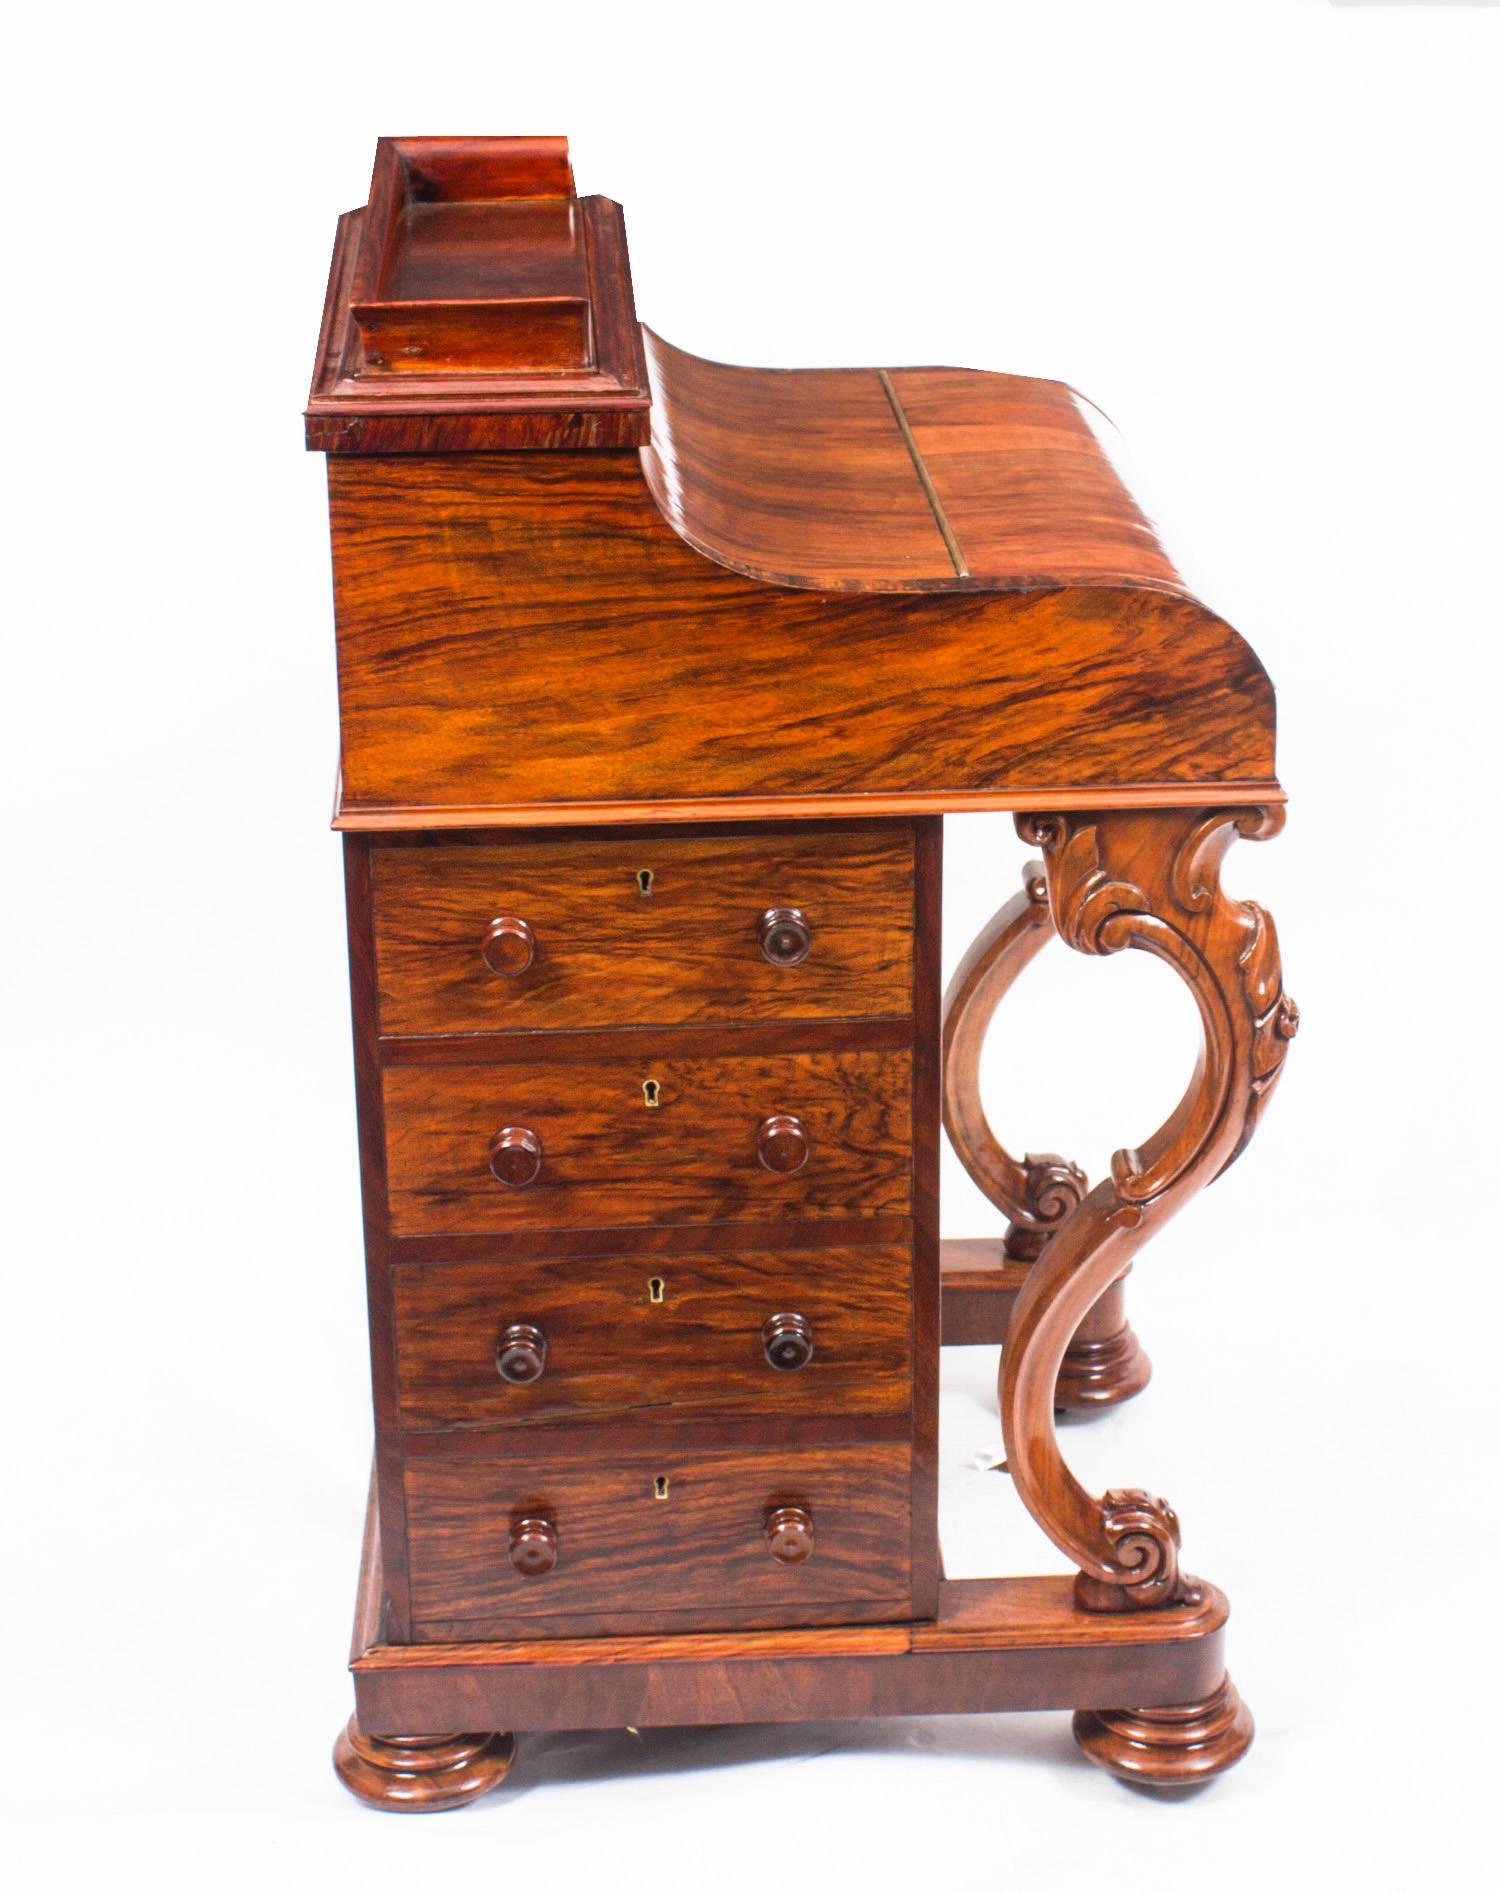 We are pleased to be able to offer for sale this very attractive example of an antique Davenport Desk. It is supplied with the original tooled, gilded, leather writing inset still intact and the desk stands on a pair of sturdy solid walnut cabriole